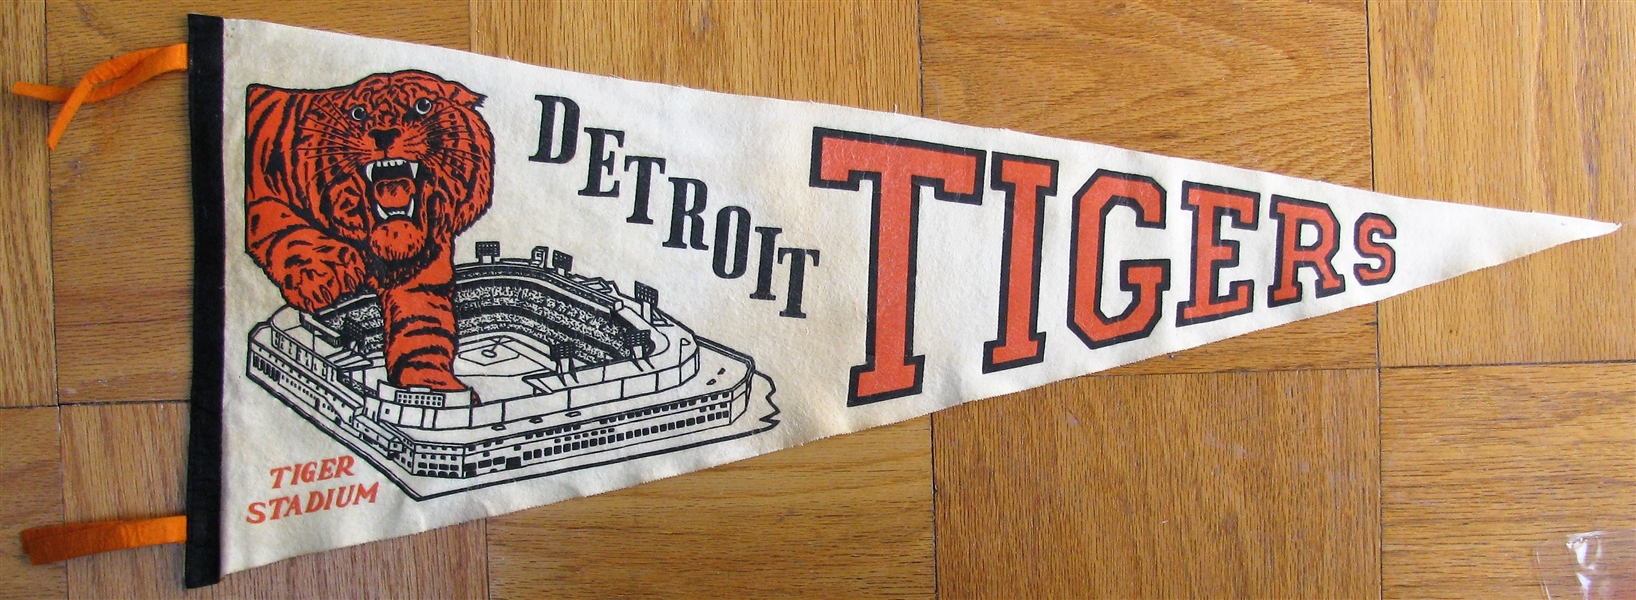 60's DETROIT TIGERS PENNANT